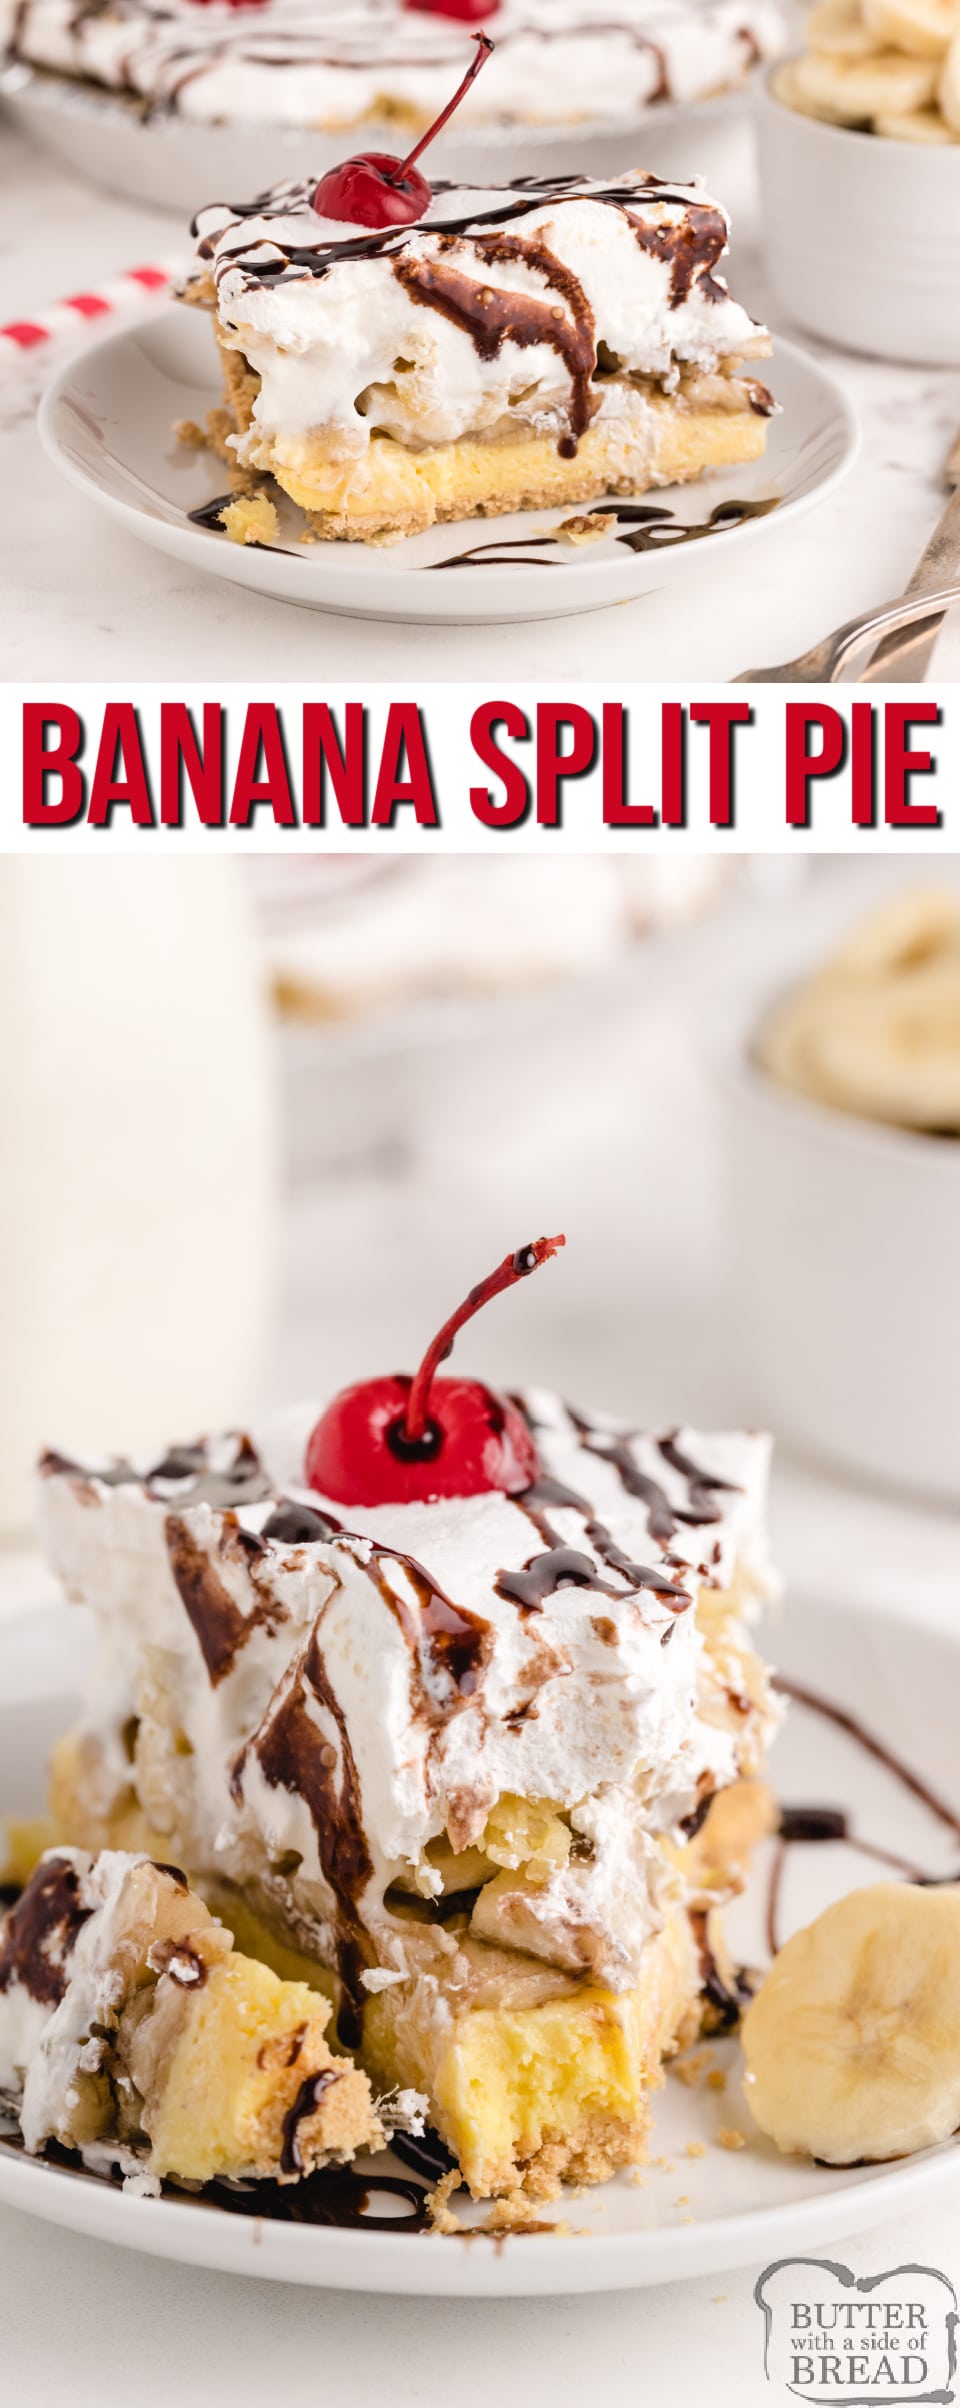 Banana Split Pie is an easy no-bake banana dessert made with a graham cracker pie crust full of cream cheese, bananas, whipped cream, pineapple, chocolate syrup and cherries. A refreshing banana split dessert that is easy to make and serve!